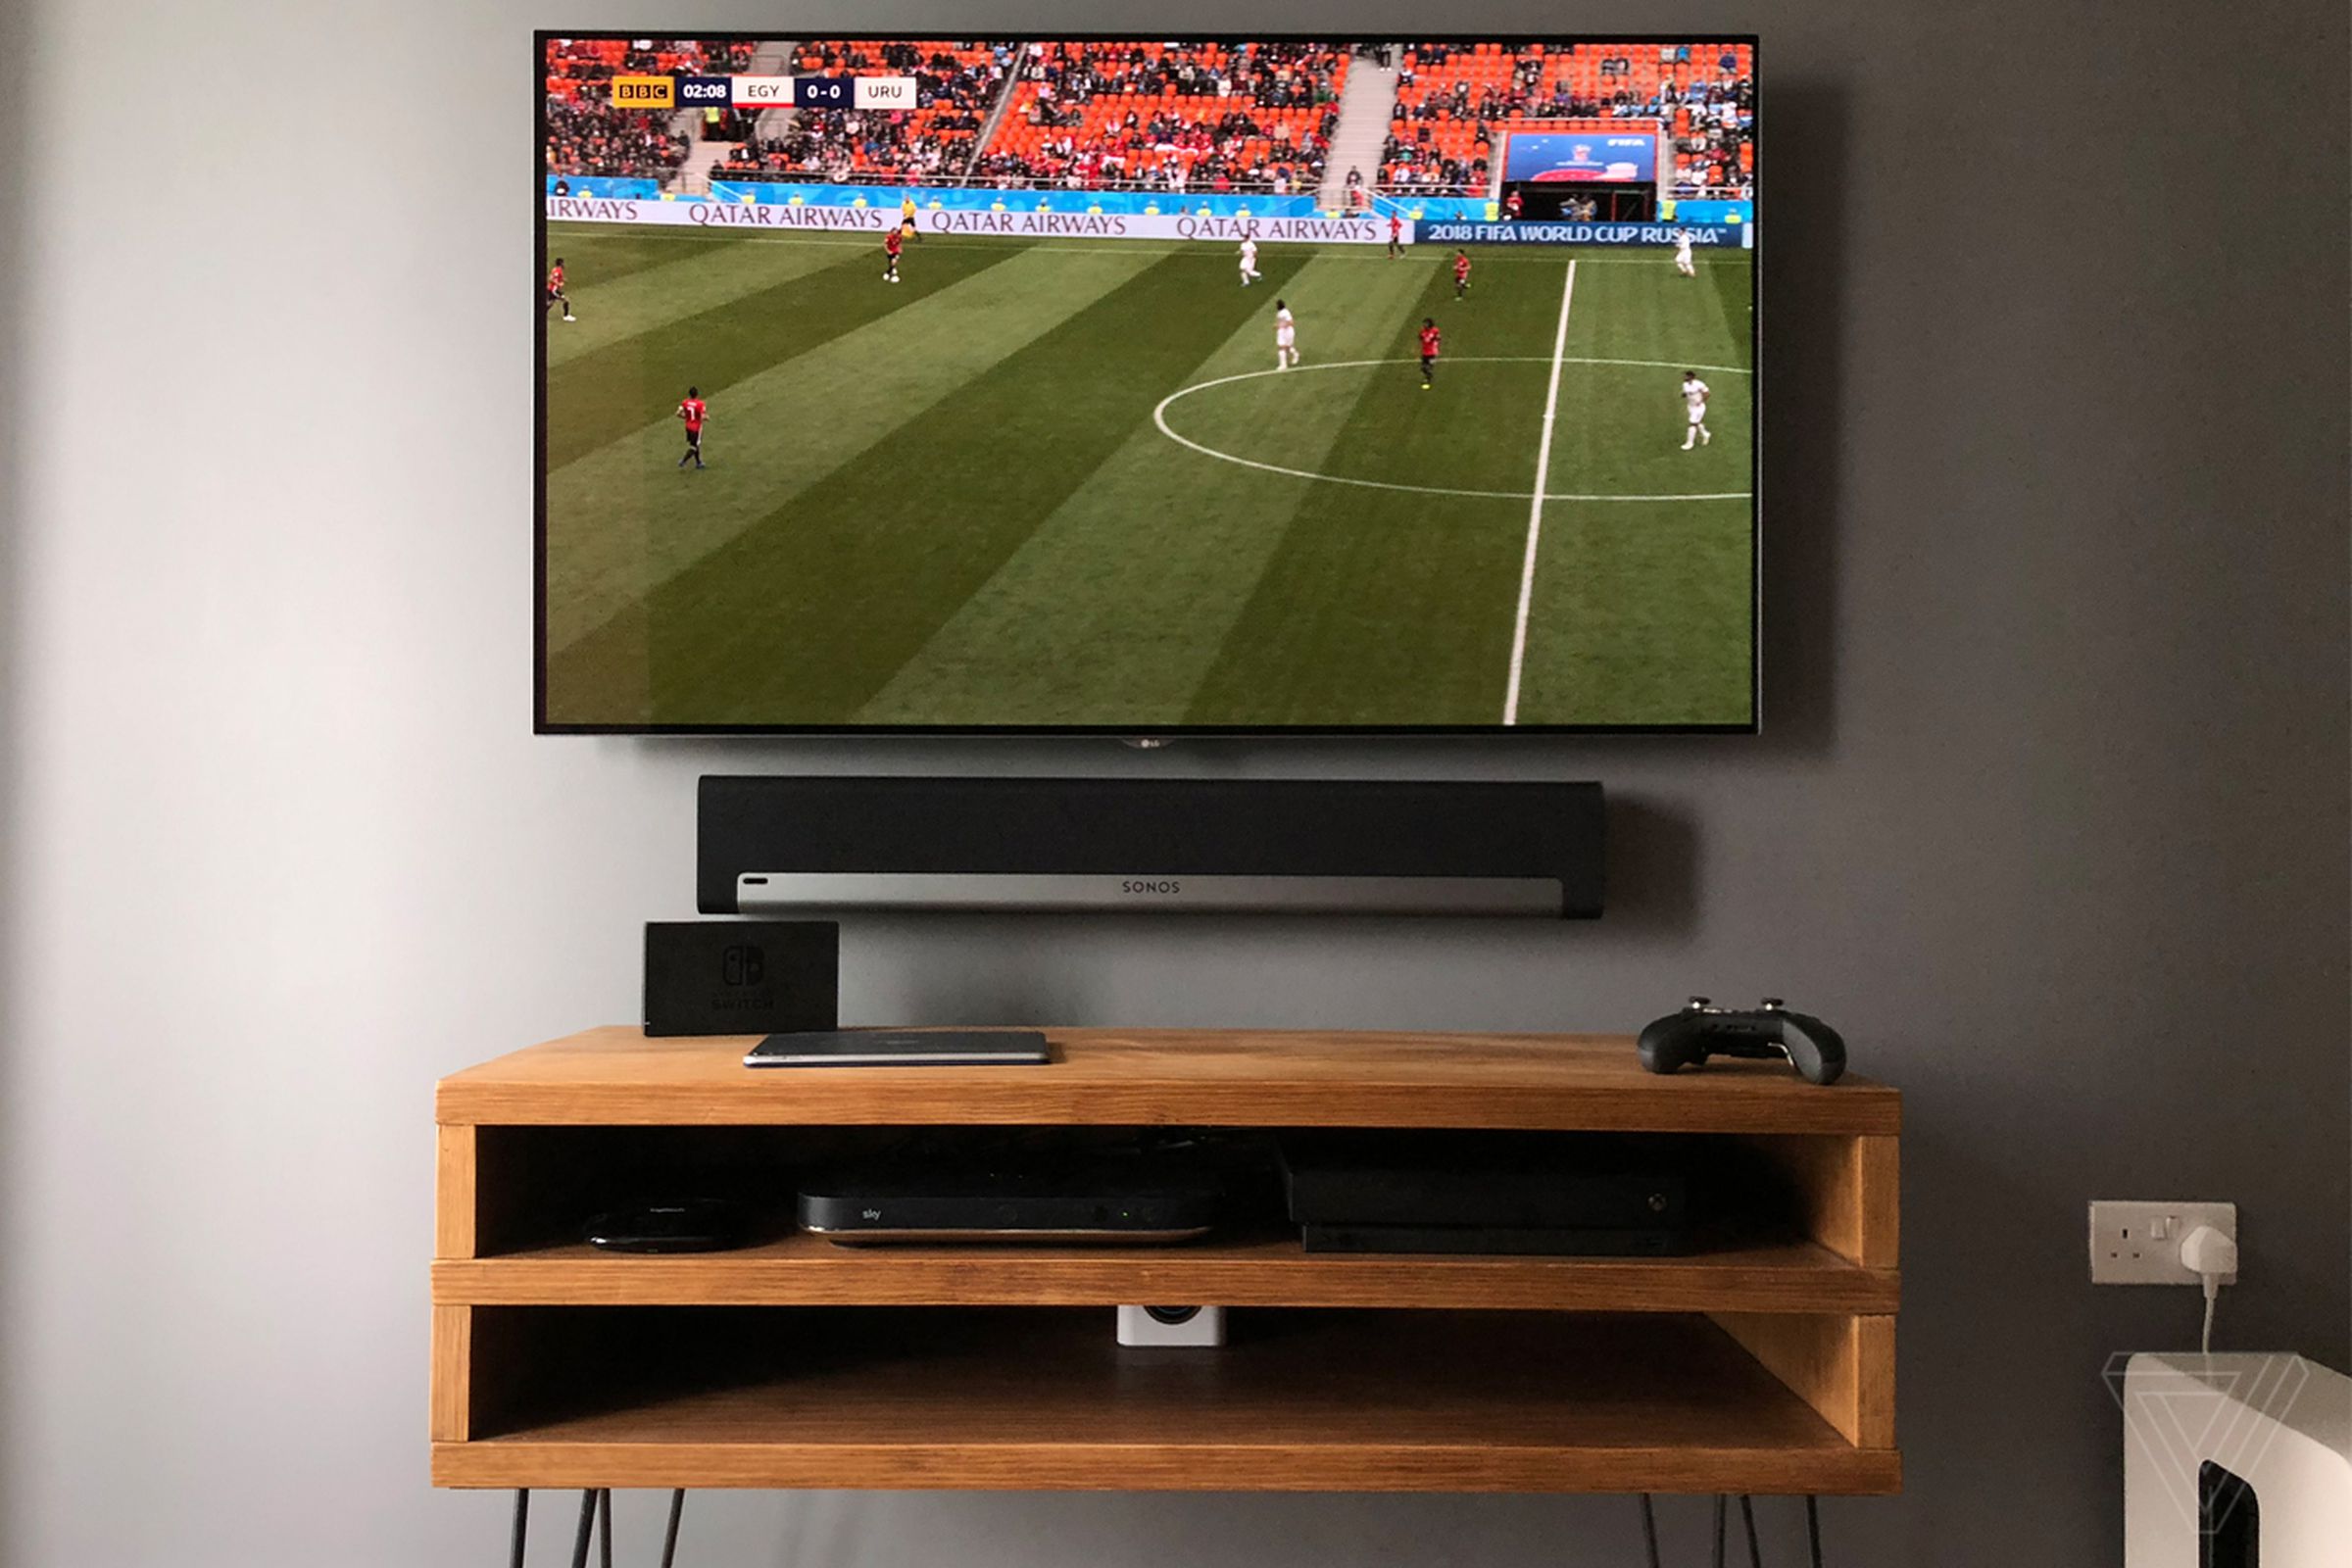 The BBC’s 4K HDR World Cup trial